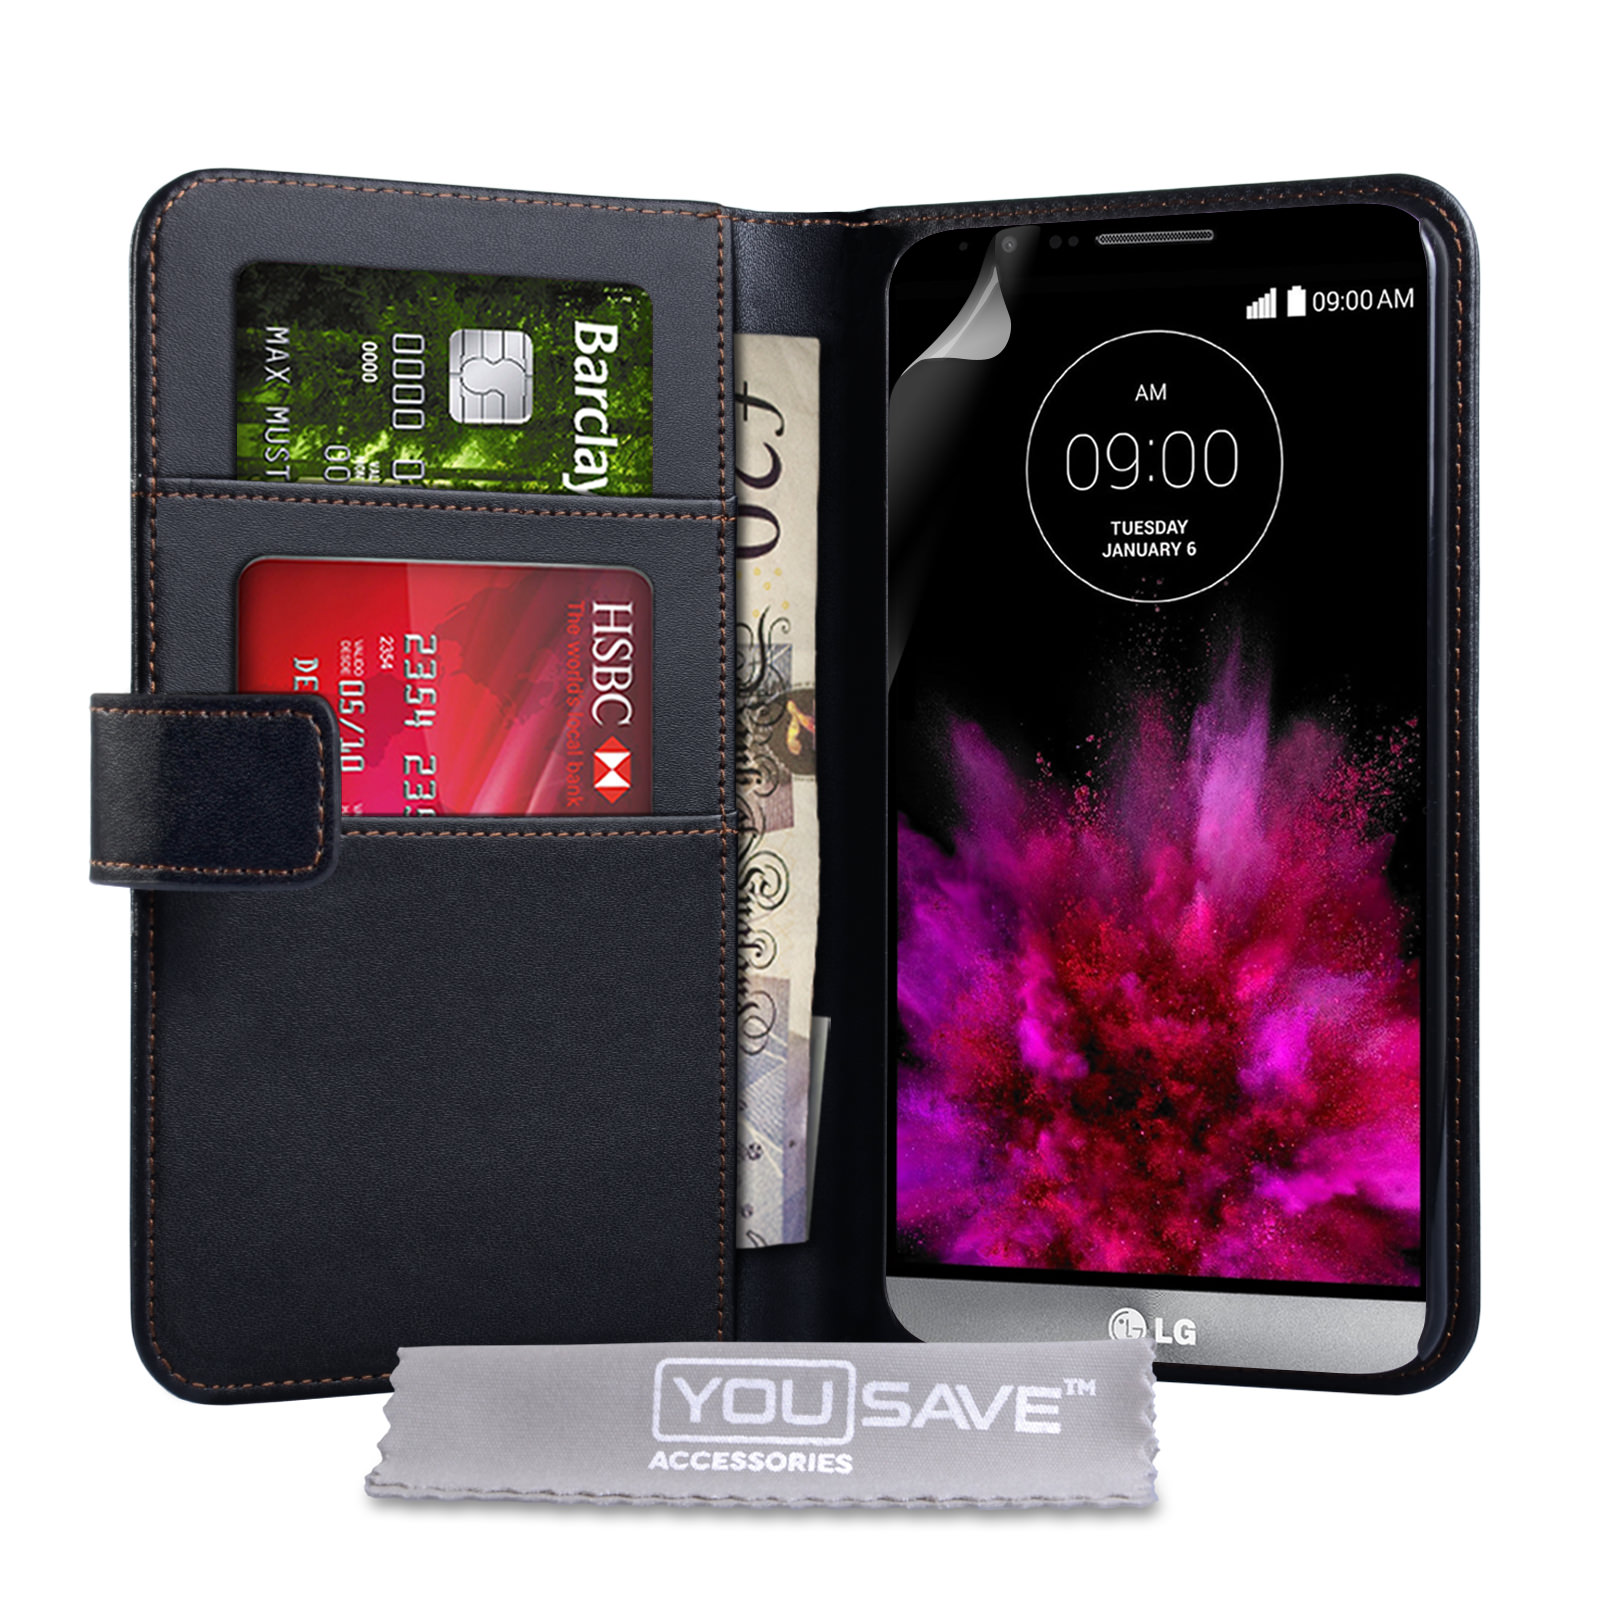 YouSave Accessories LG G4 Leather-Effect Wallet Case - Black